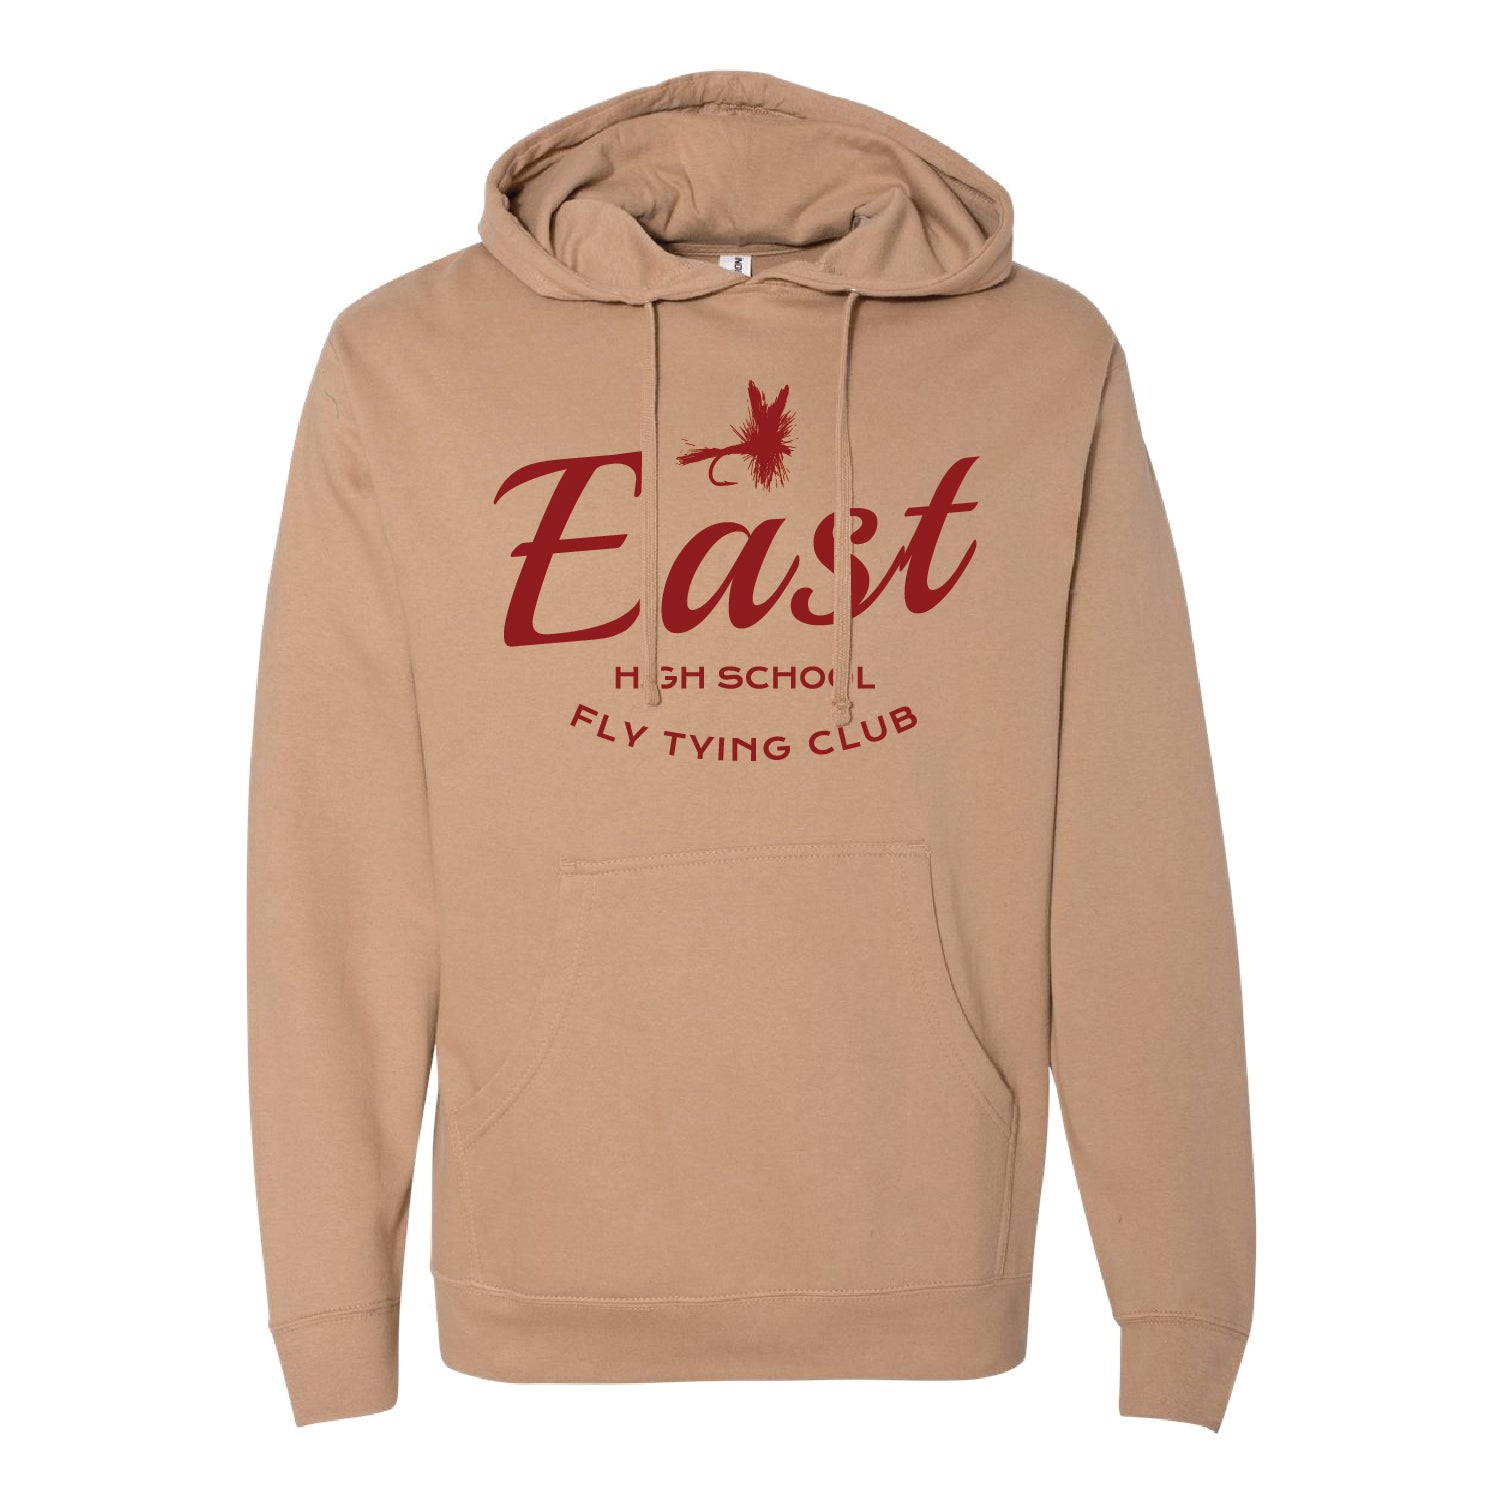 Duluth East Fly-tying Club Unisex Midweight Hooded Sweatshirt - DSP On Demand